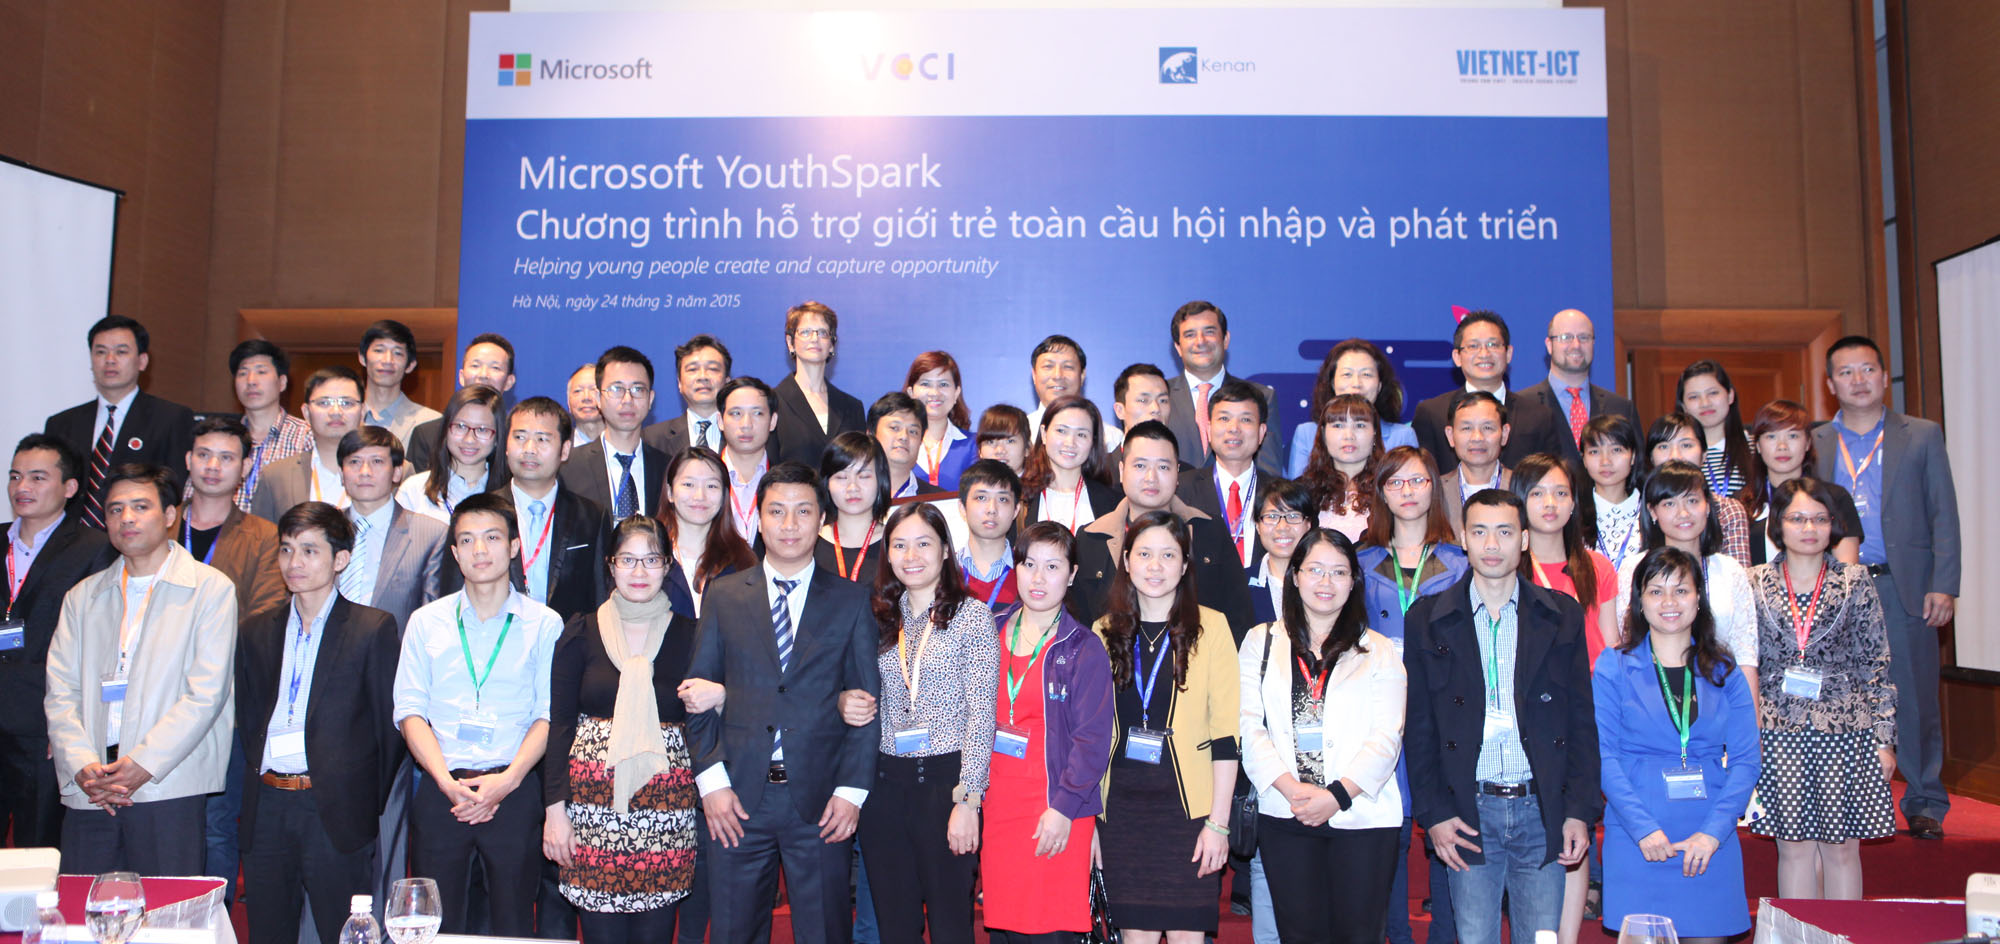 Cesar Cernuda, Microsoft President Asia Pacific, Dang Huy Dong, Vietnam Deputy Minister for Planning and Investment and Vietnamese students gather on stage to celebrate Microsoft's YouthSpark investment in Vietnam.